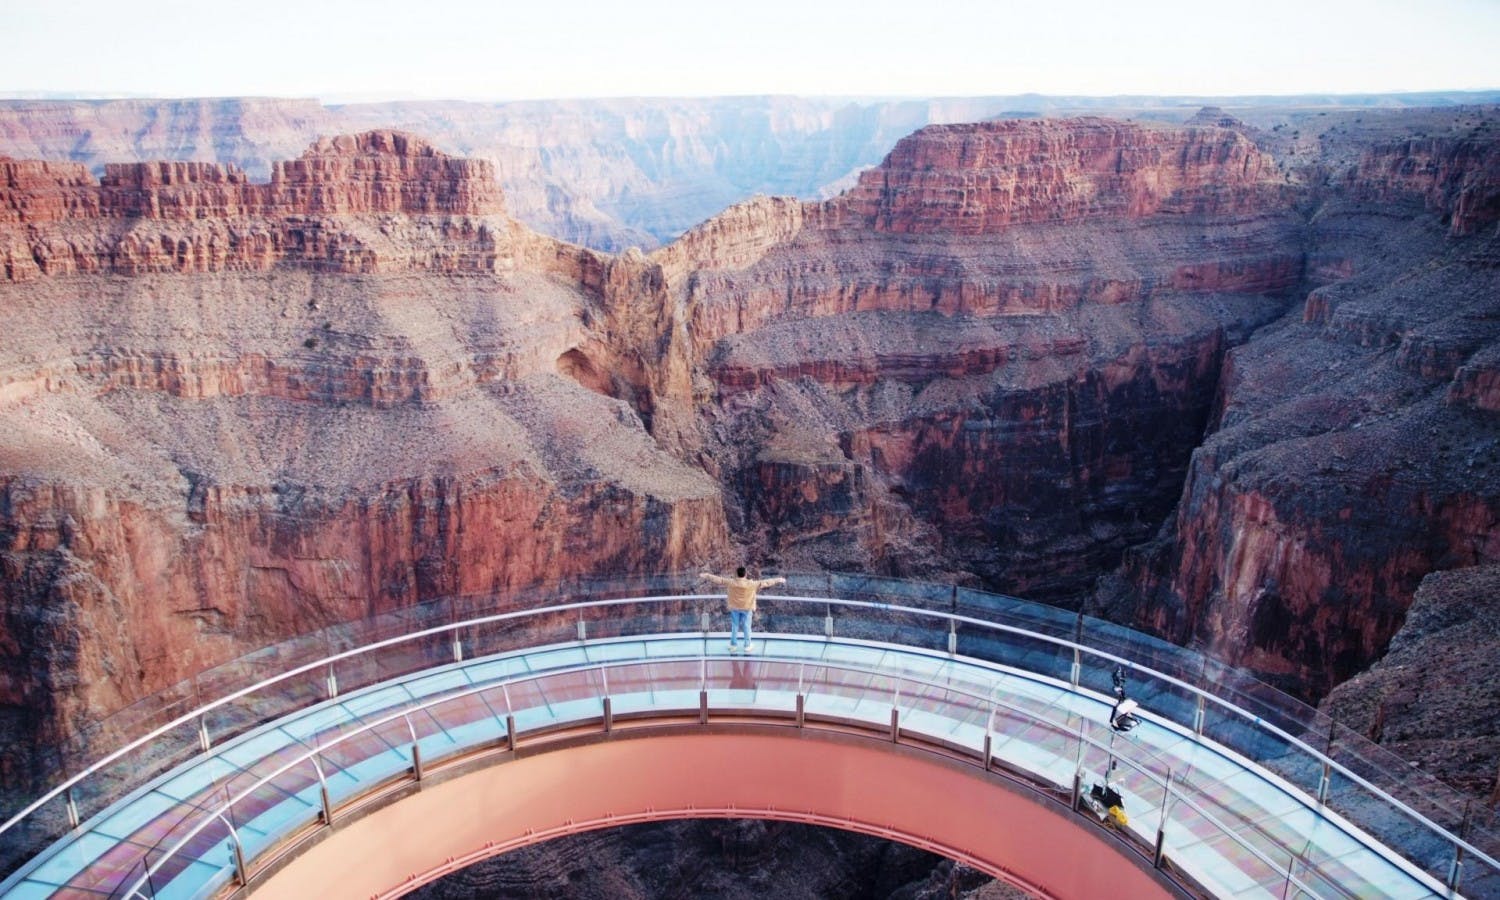 Grand Canyon West Rim bus tour with Hoover Dam photo stop and Skywalk ticket